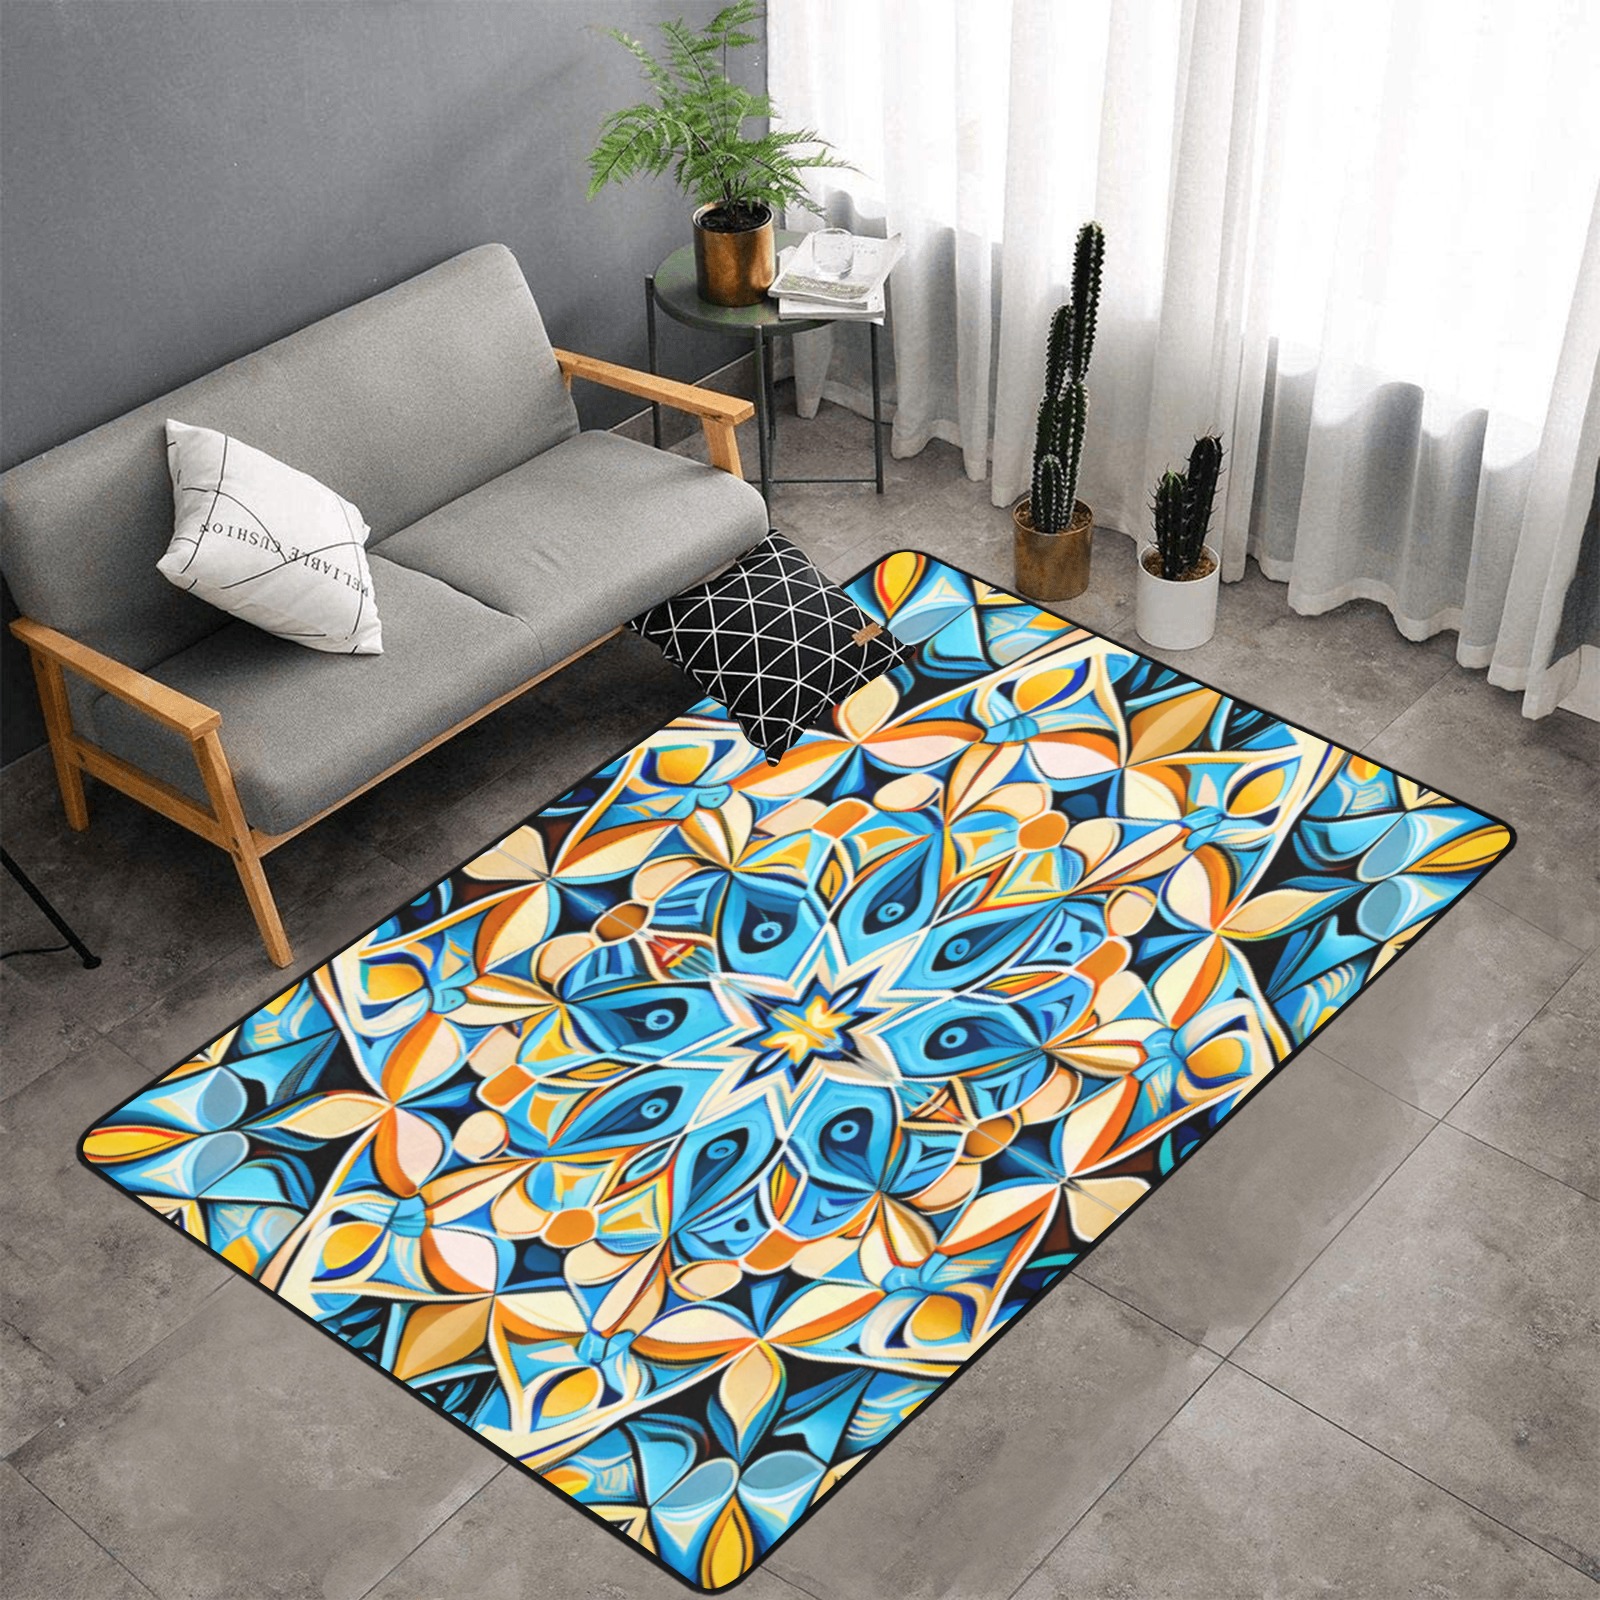 intricate geometric pattern, sky blue and yellow Area Rug with Black Binding 7'x5'